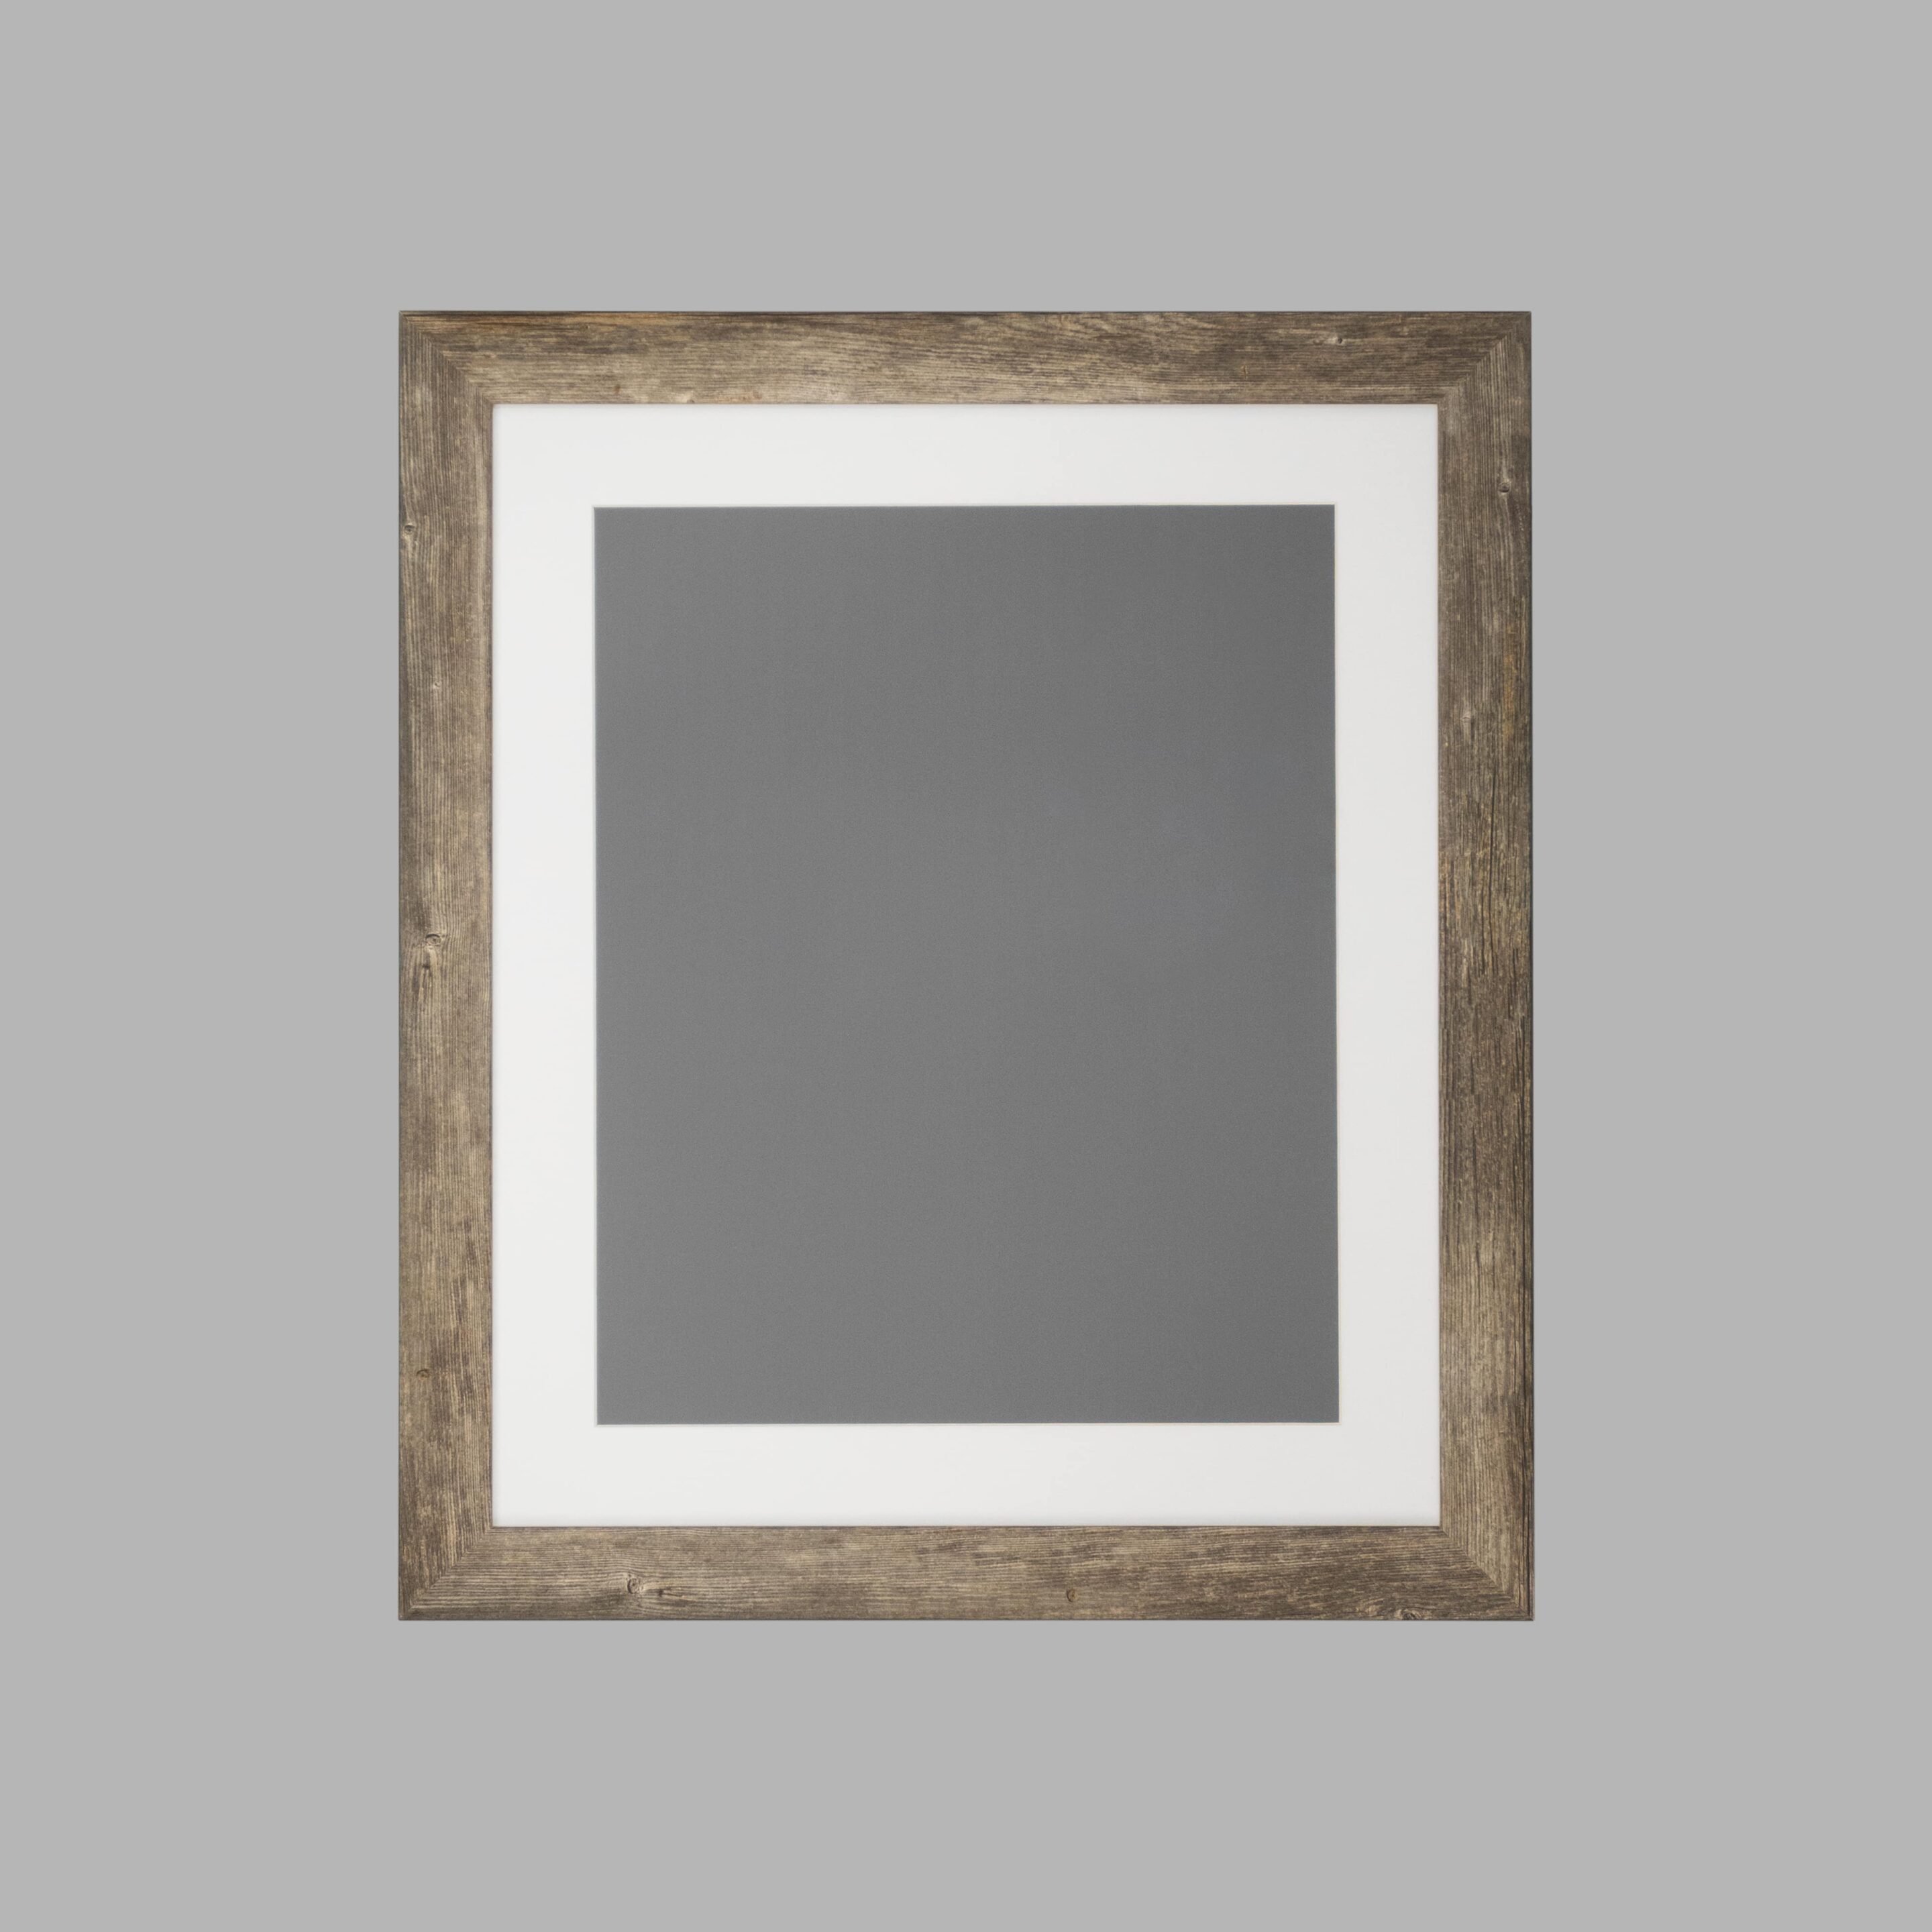 Black framed photograph with white matte